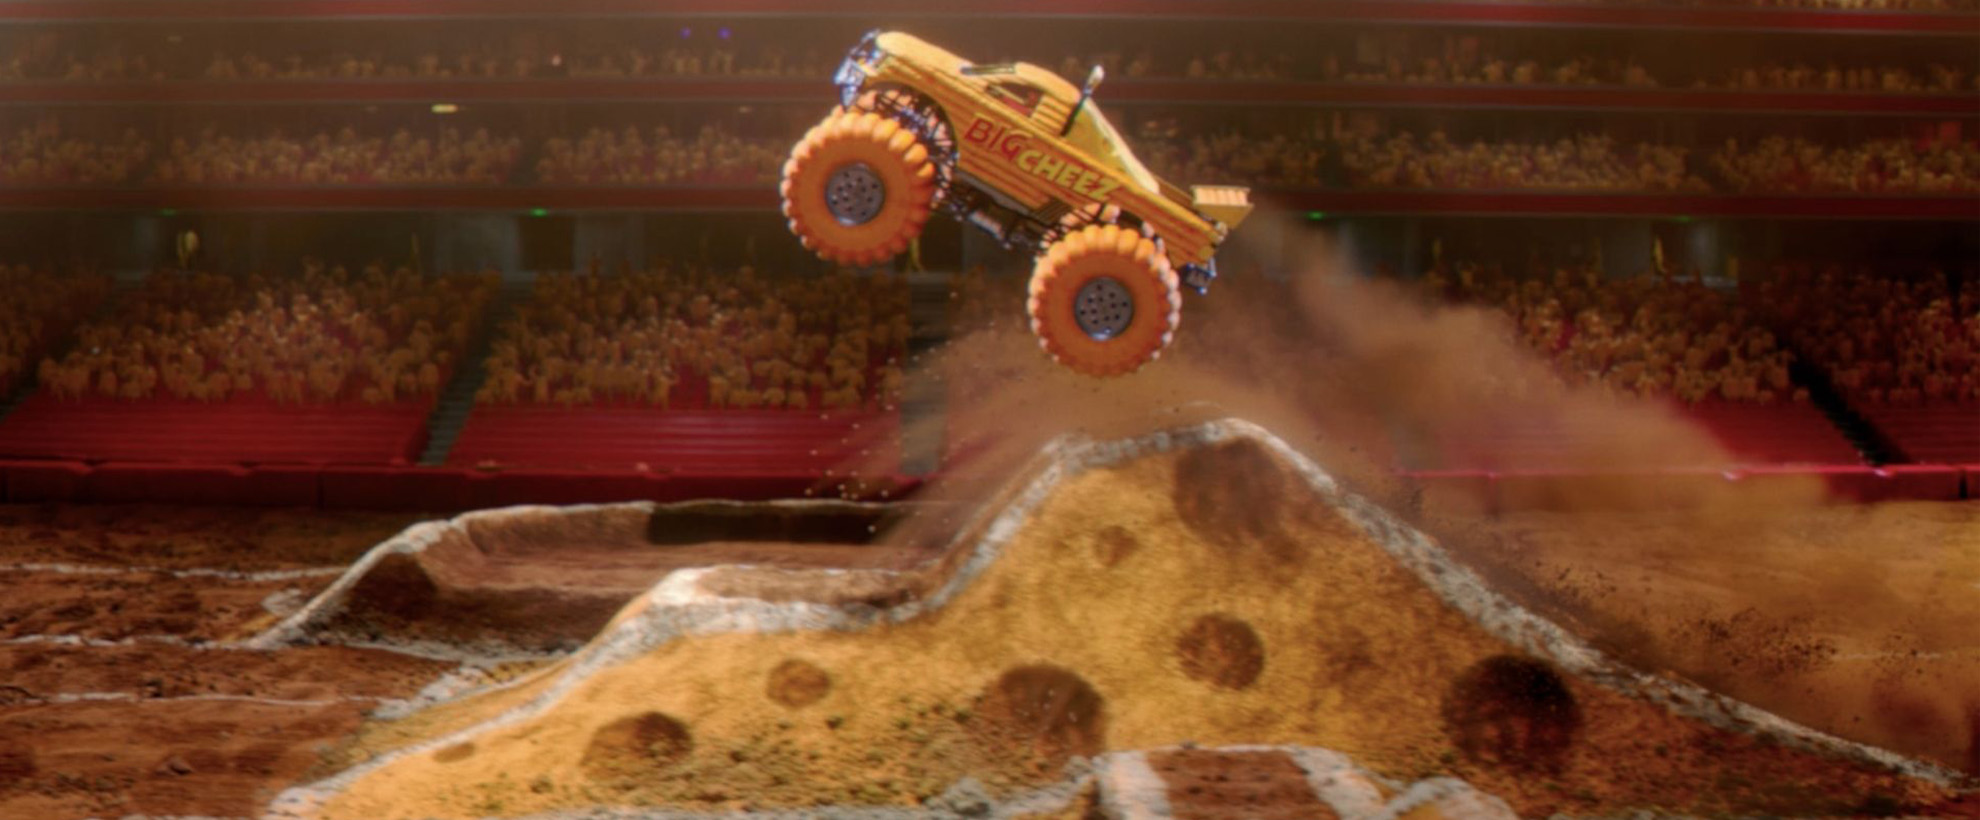 A yellow monster truck take off from a cheese ramp with a crowd in the background.